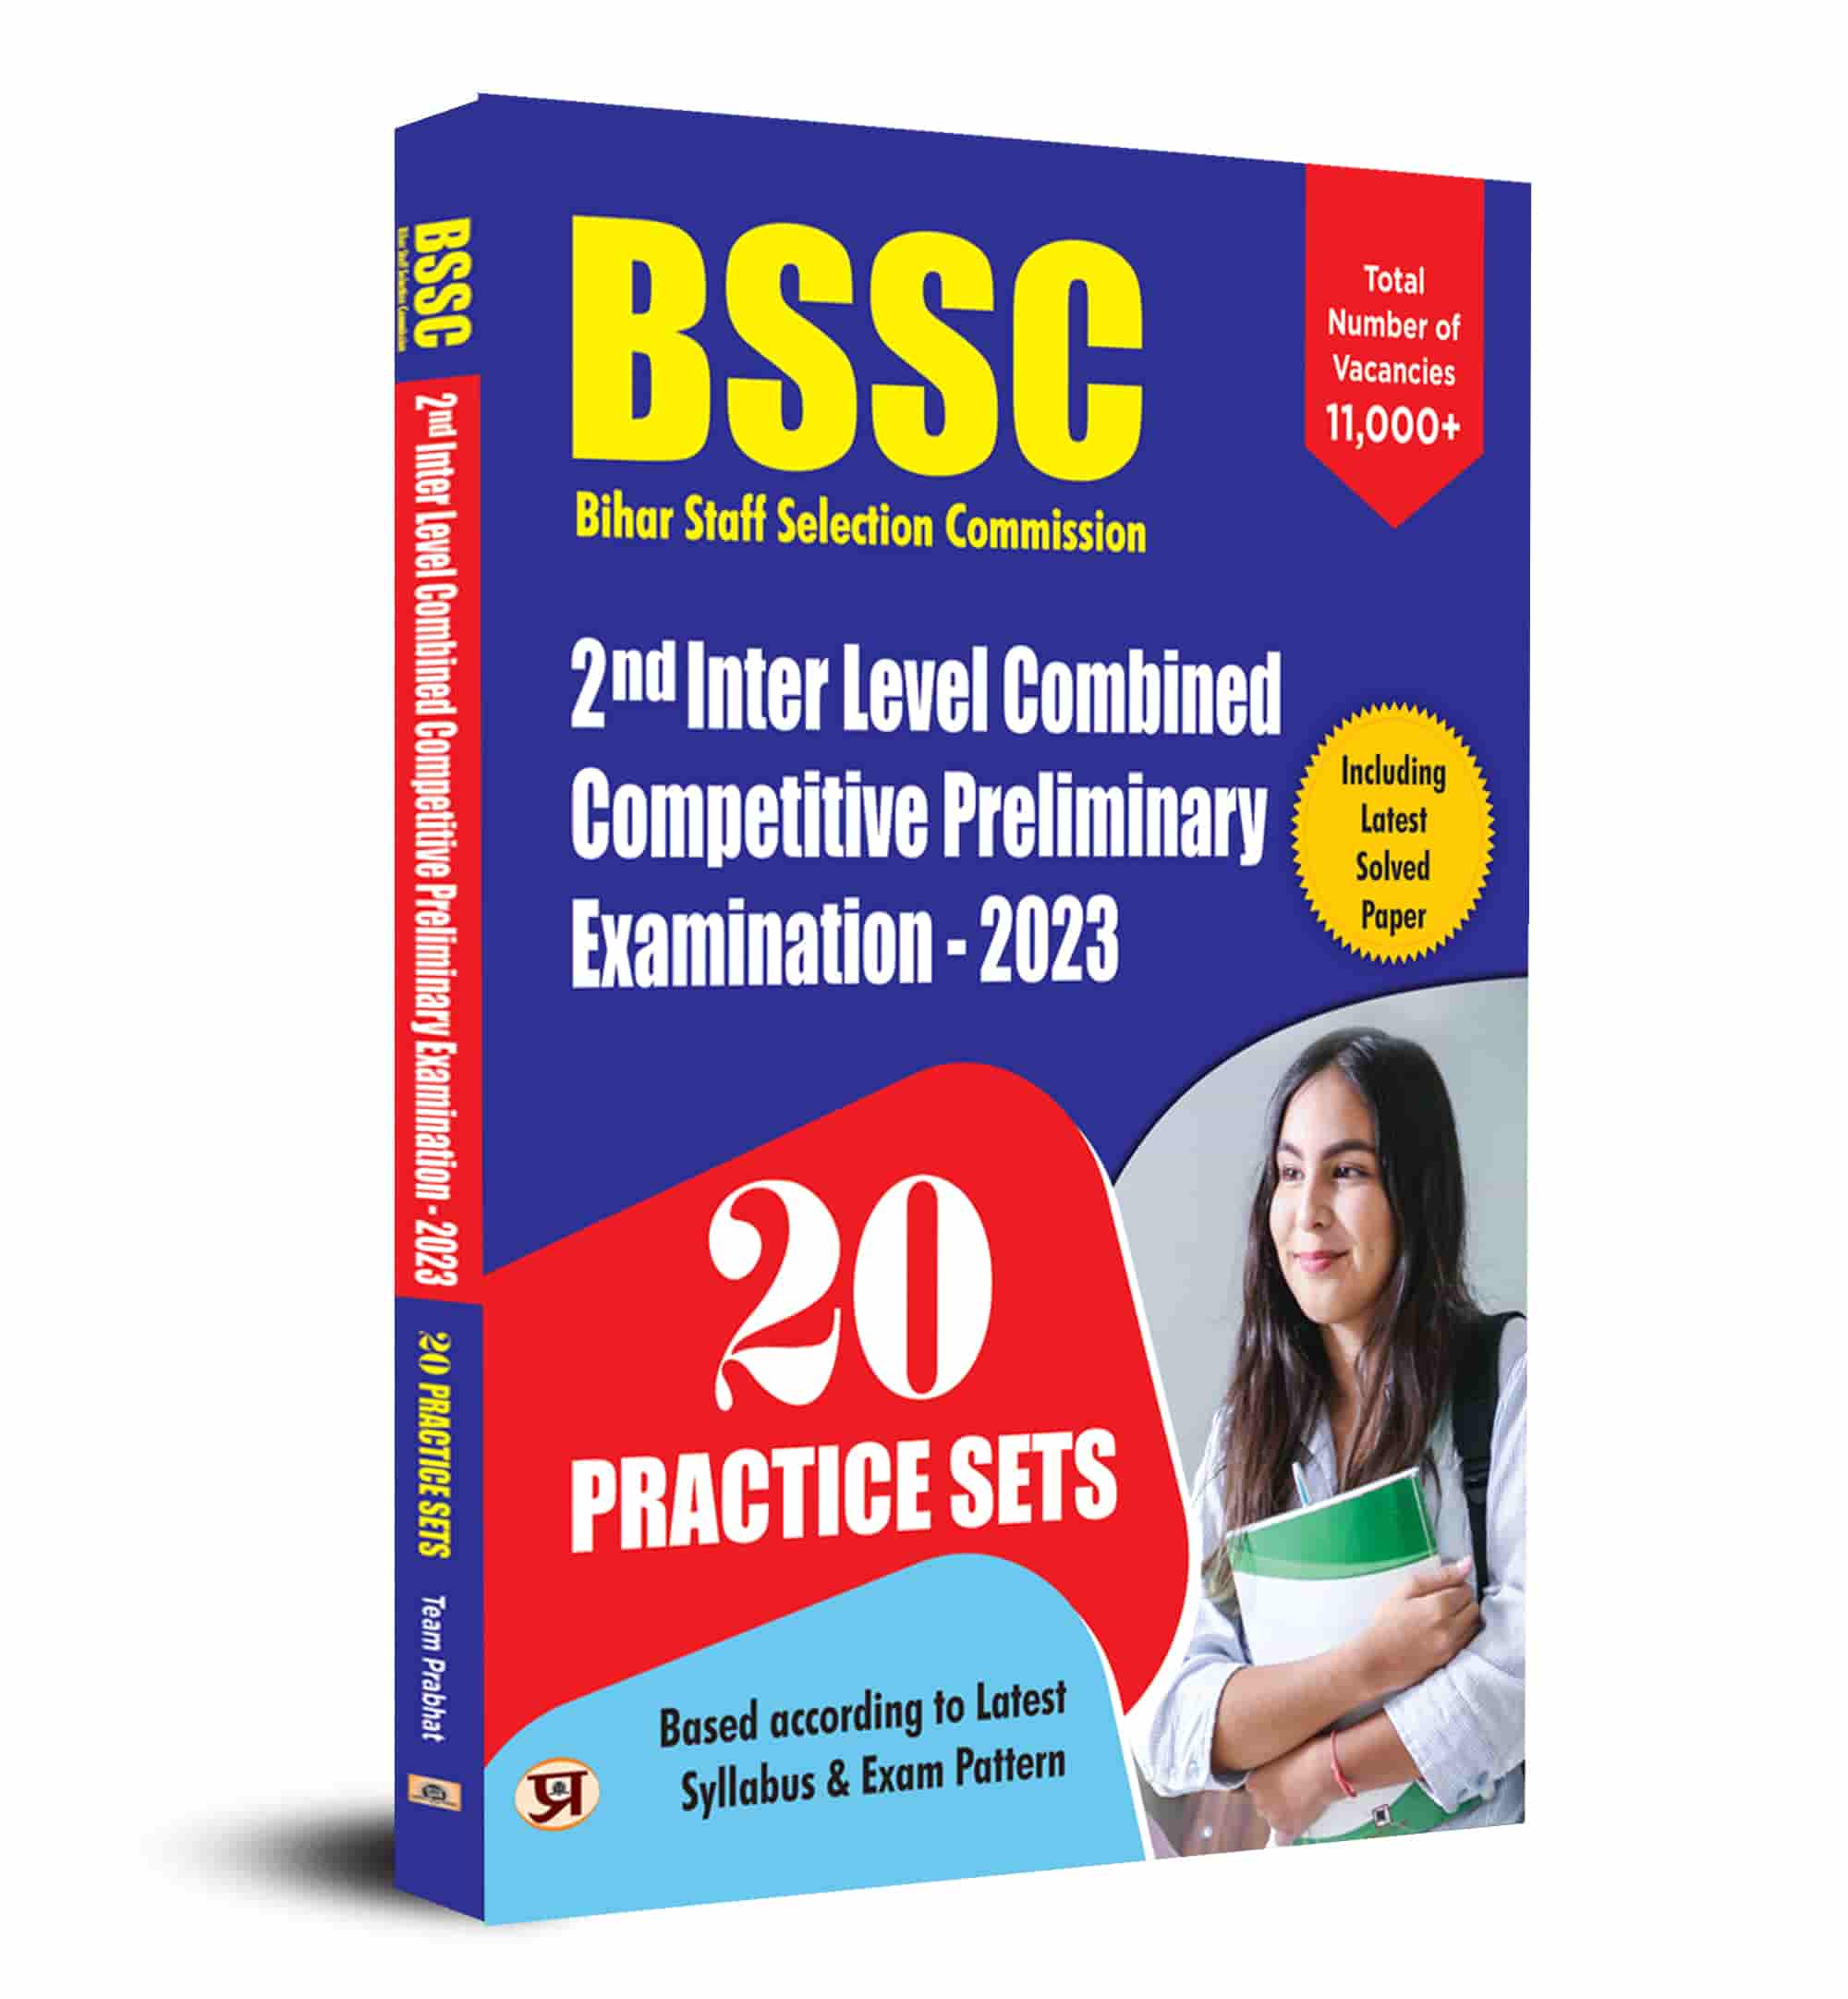 BSSC Bihar Staff Selection Commission 2nd Inter Level Combined Competitive Preliminary Examination 20 Practice Sets- 2023 Book in English